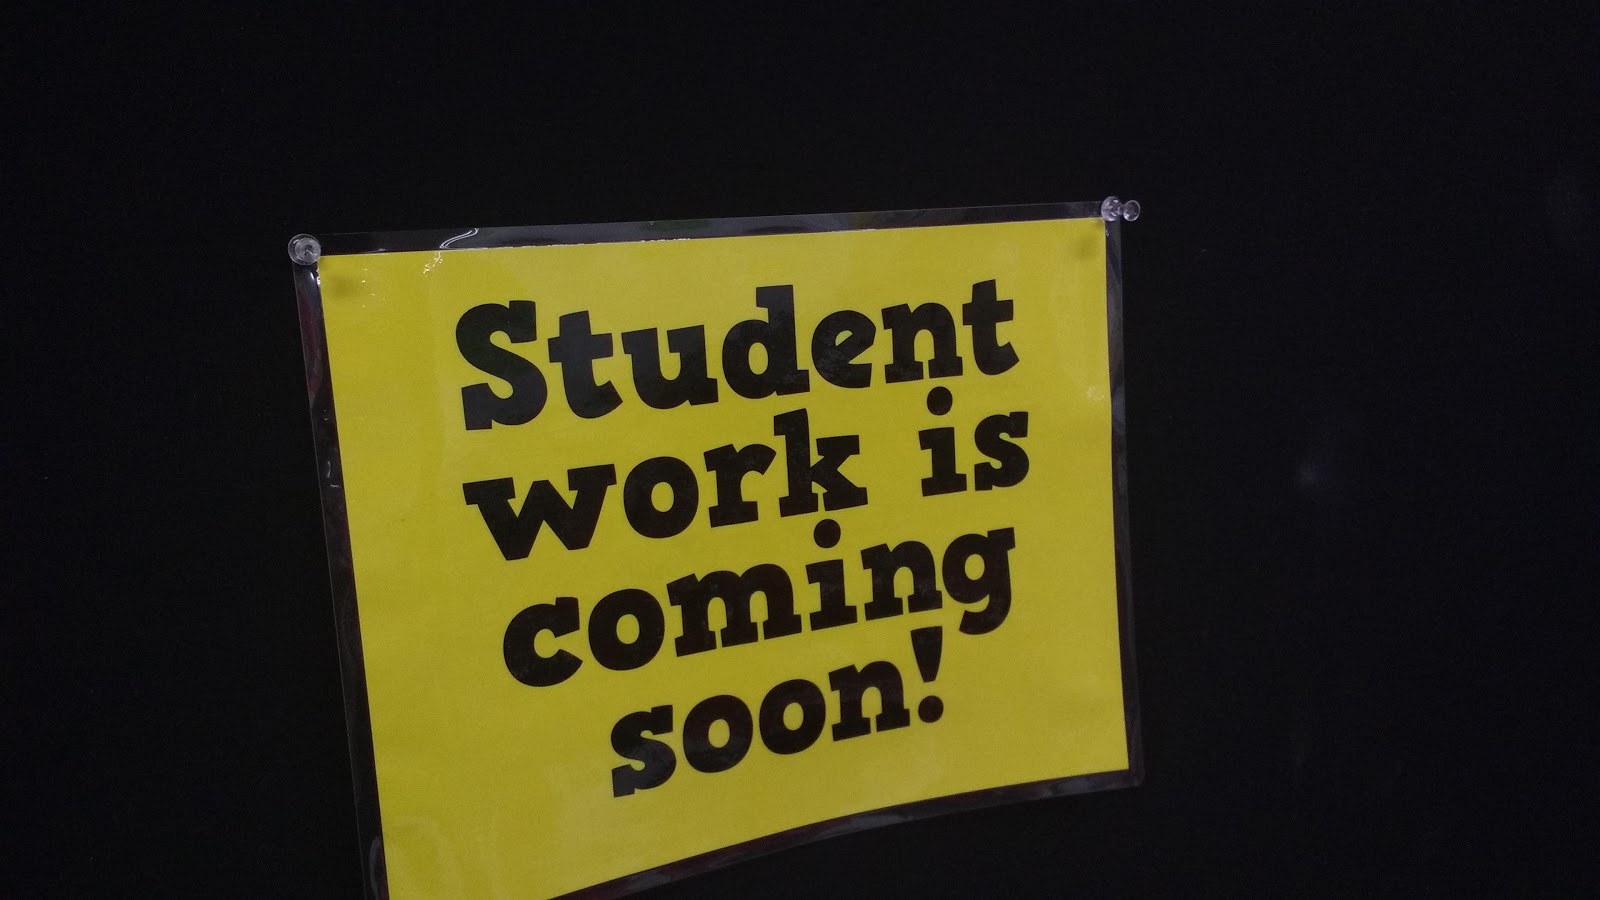 Student work is coming soon poster